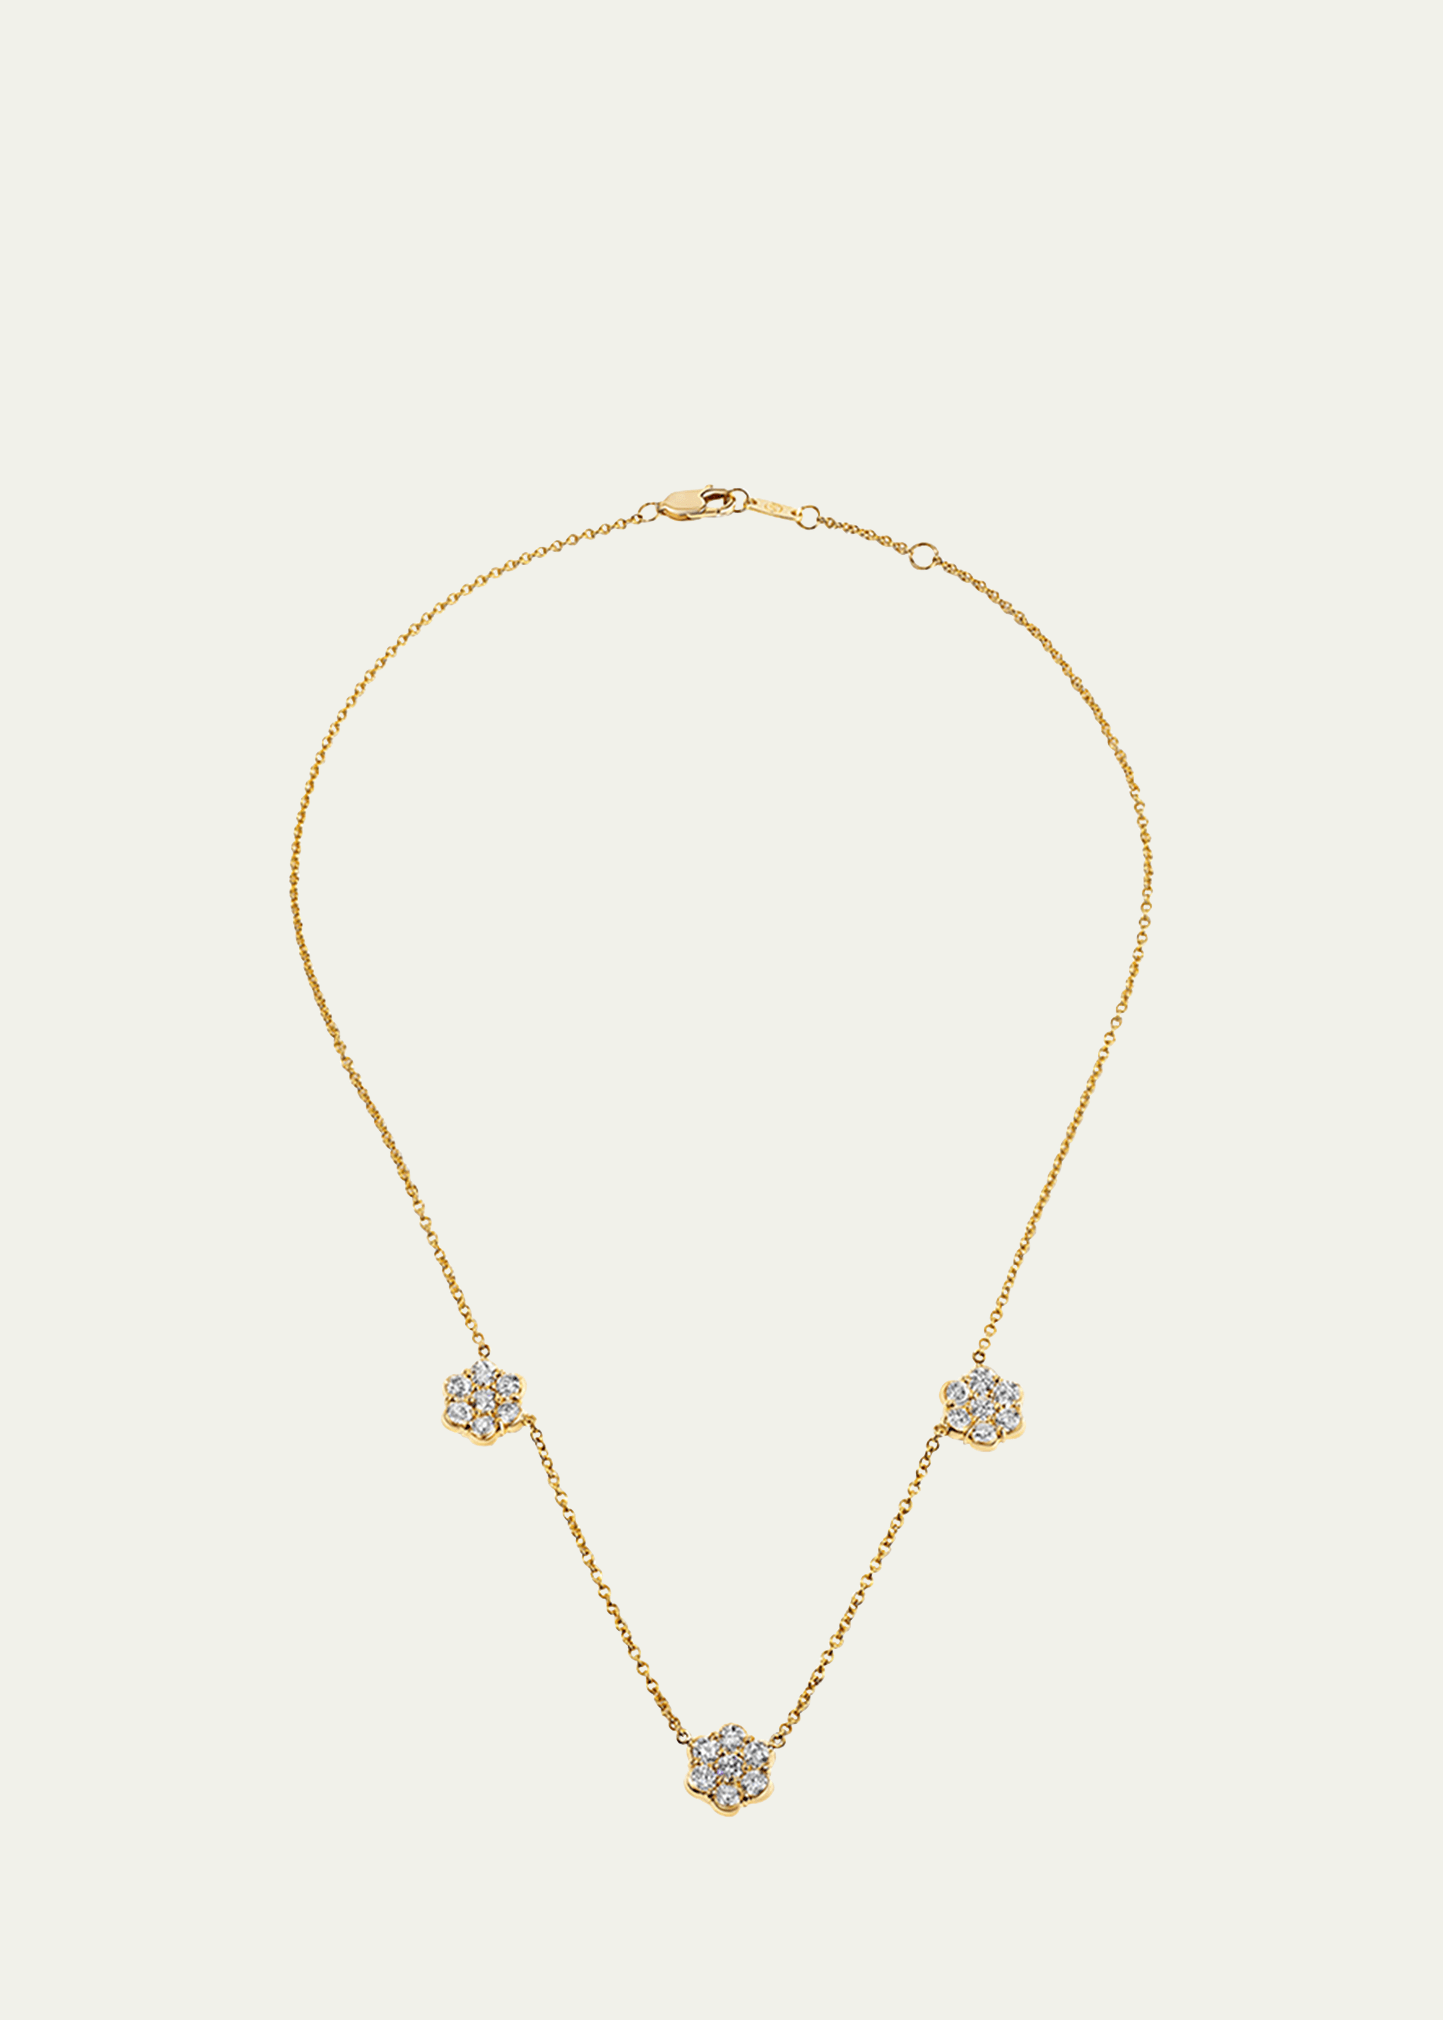 Bayco 18K Gold and Diamond Flower Station Necklace, Small